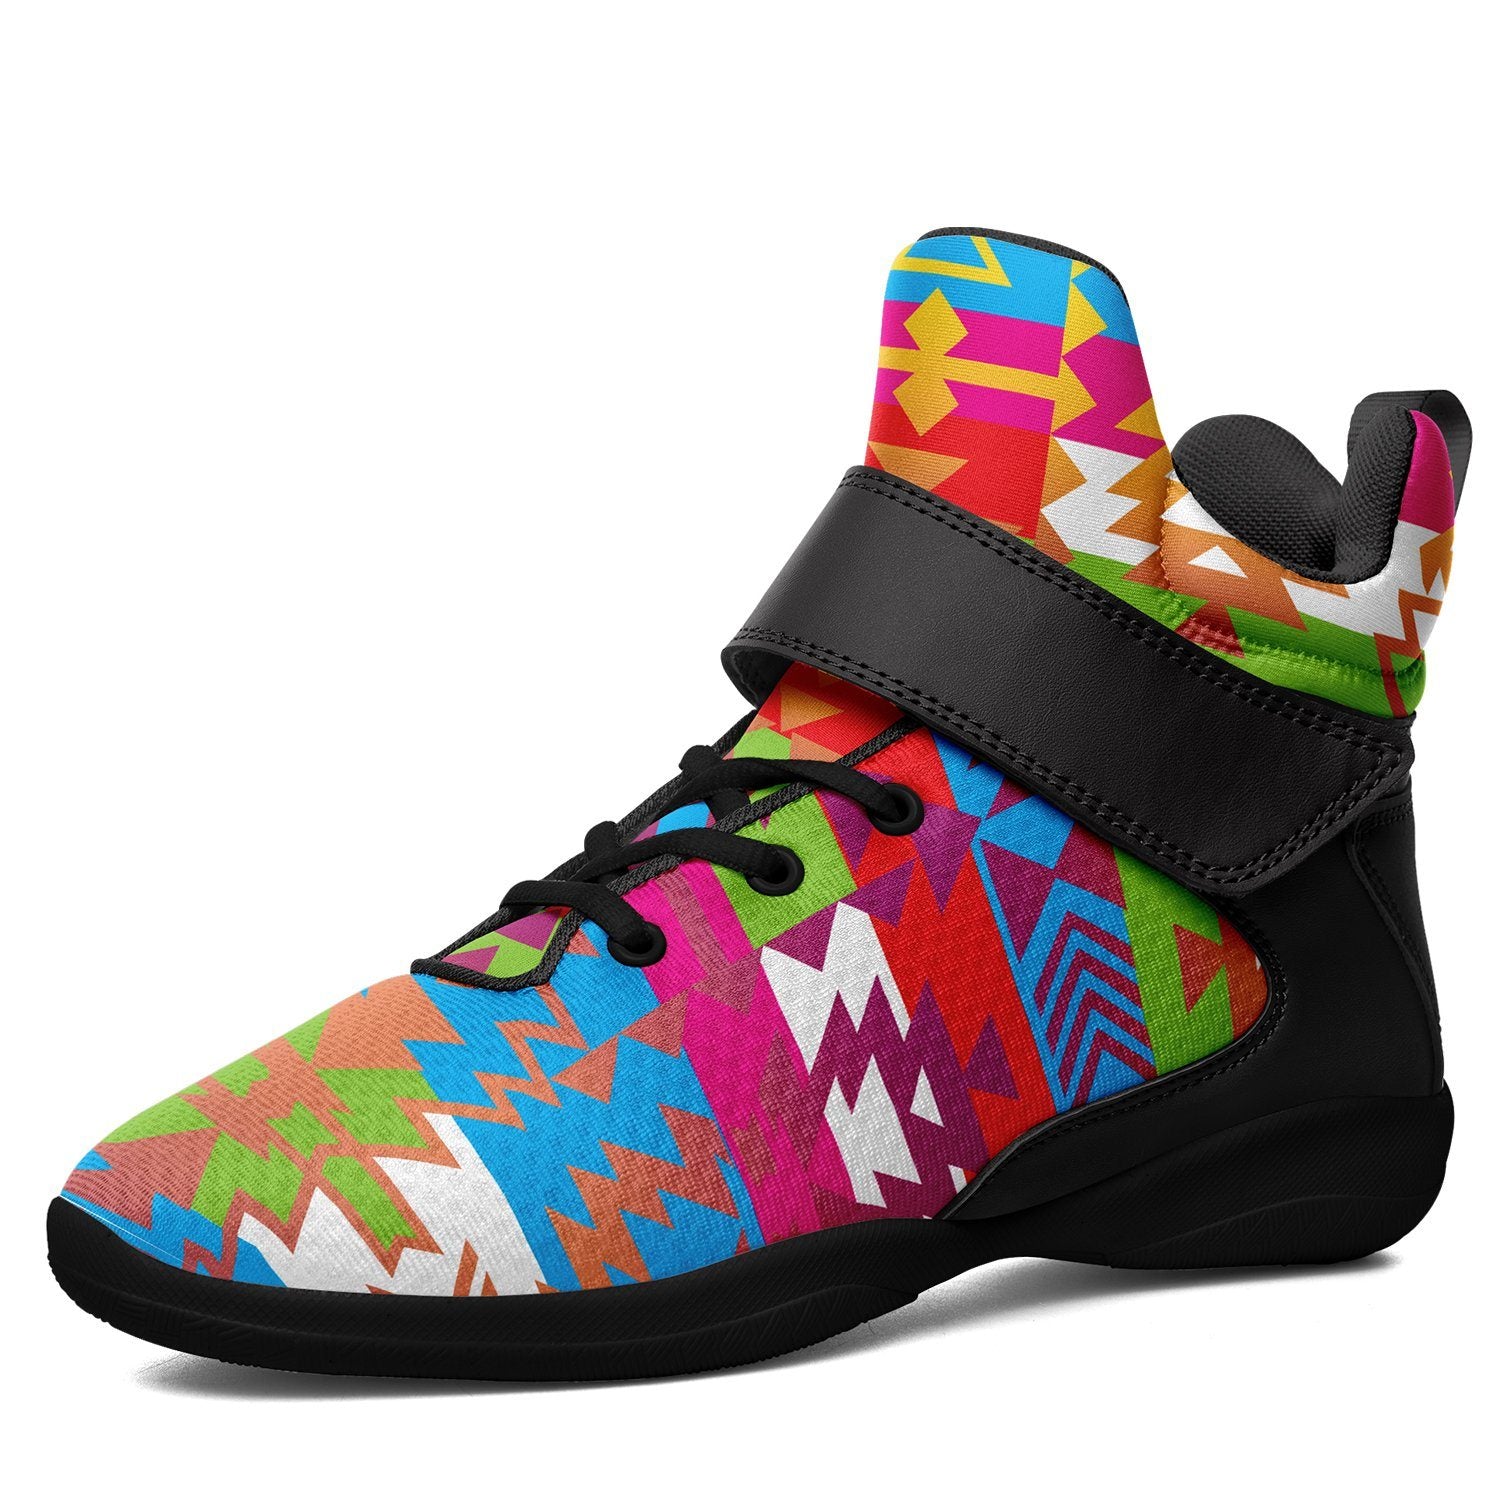 Grand Entry Ipottaa Basketball / Sport High Top Shoes 49 Dzine US Women 4.5 / US Youth 3.5 / EUR 35 Black Sole with Black Strap 